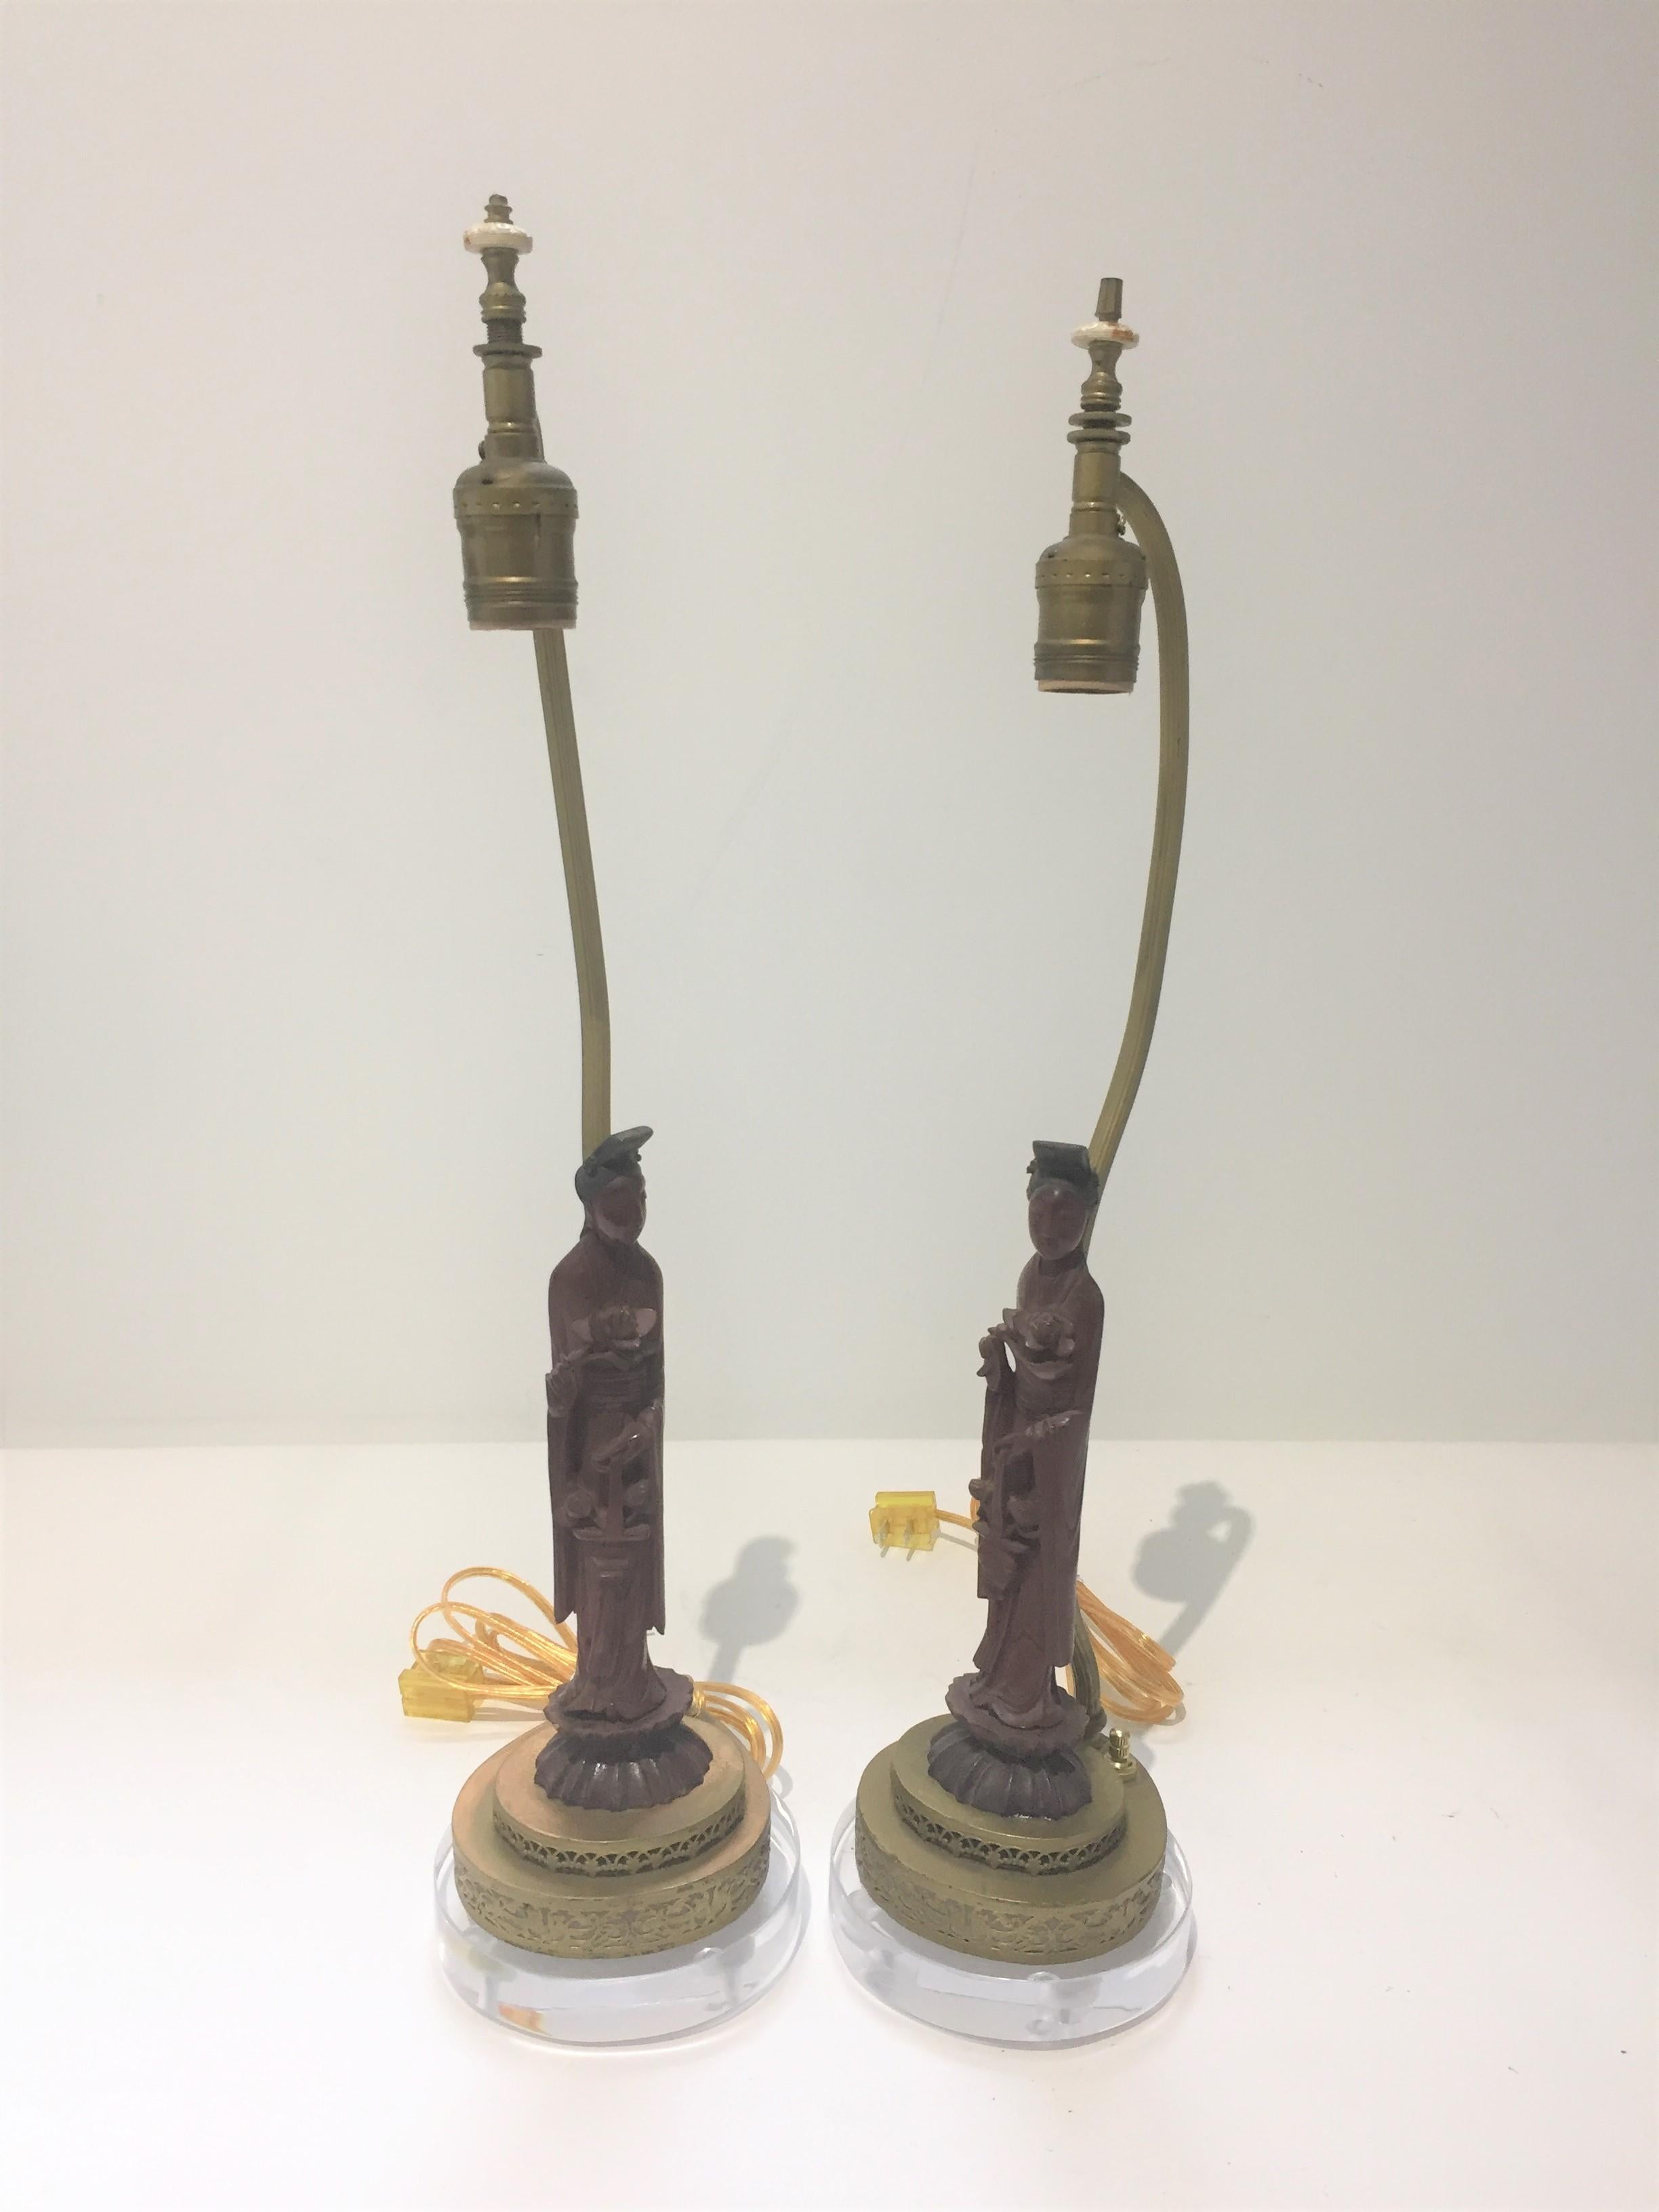 This stylish pair of Art Deco vanity table lamps date to the 1920s thru the 1930s and are fabricated with dark cinnabar colored Quan Yin figures holding a lotus flower.

These have recently been re-wired and mounted on Lucite bases.

Over time